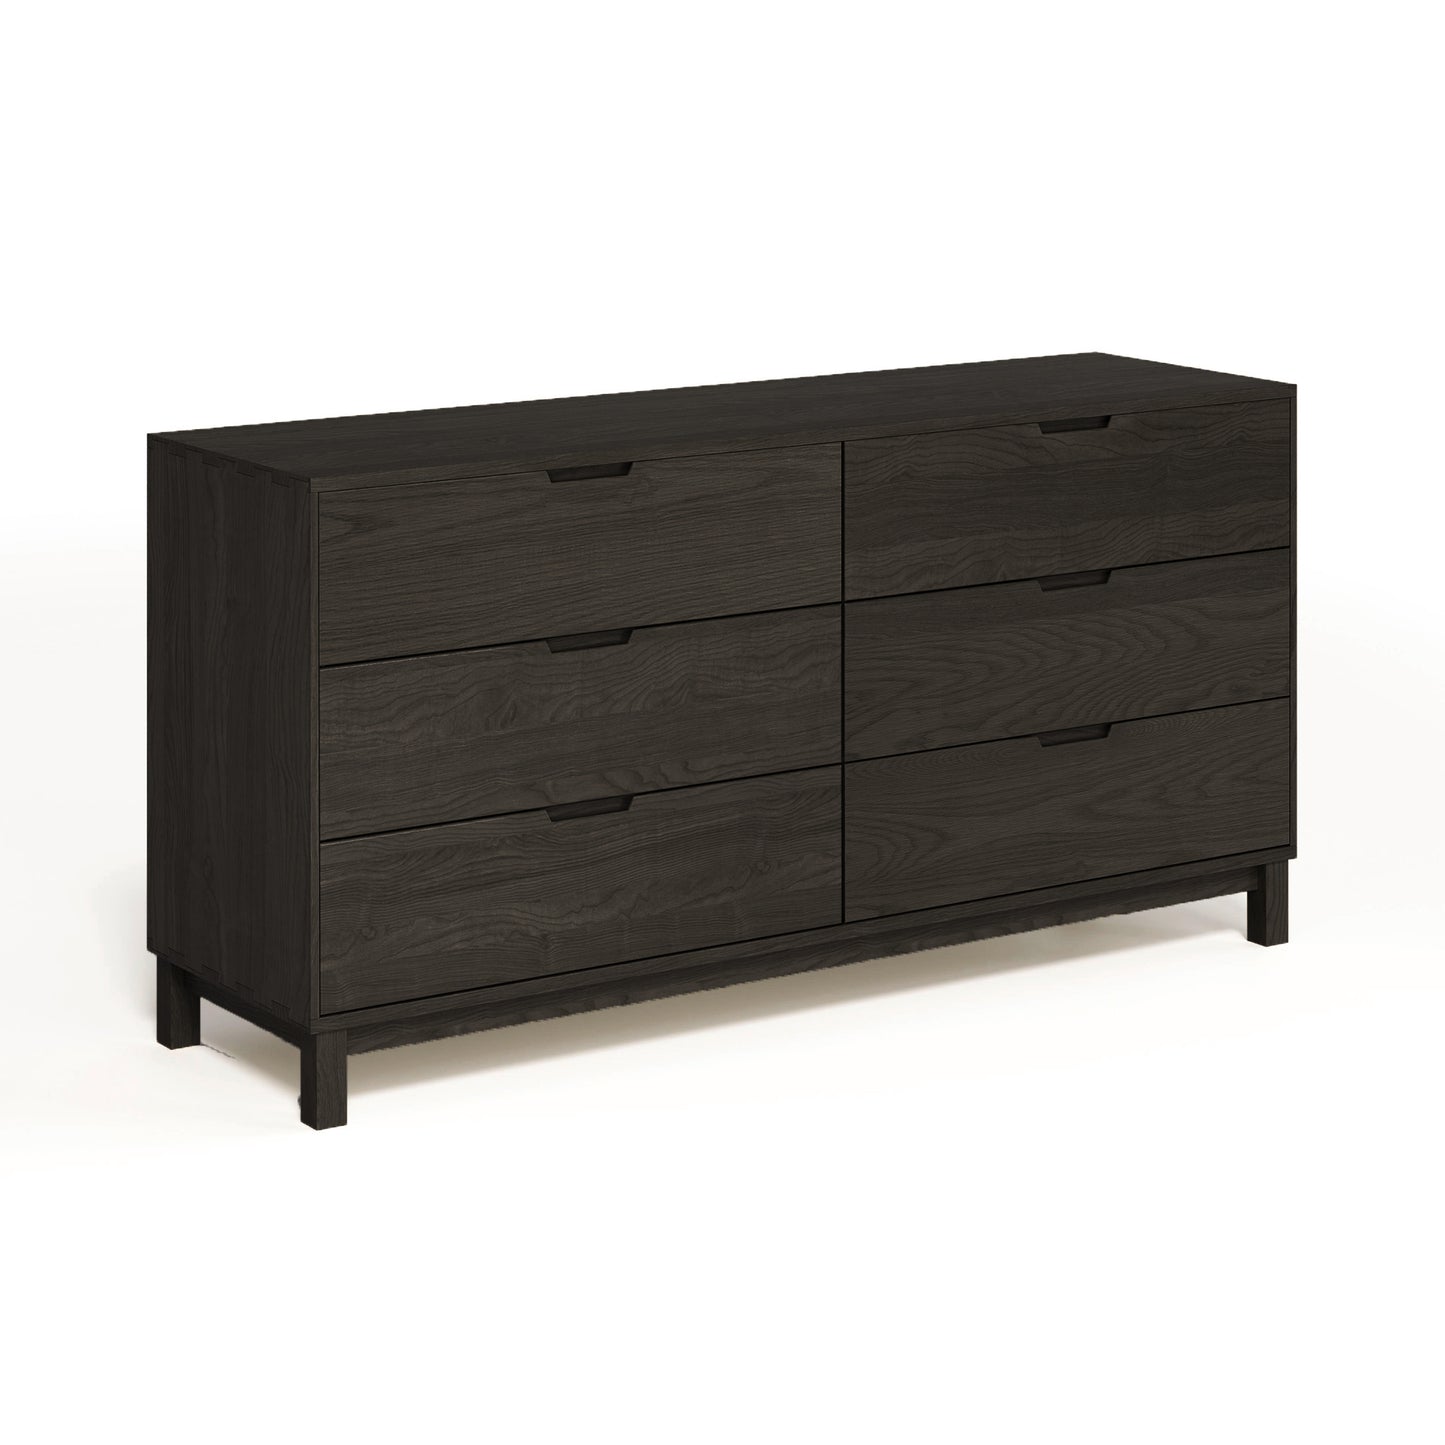 A modern black Copeland Furniture Oslo 6-Drawer Dresser against a white background, perfect for bedroom storage.